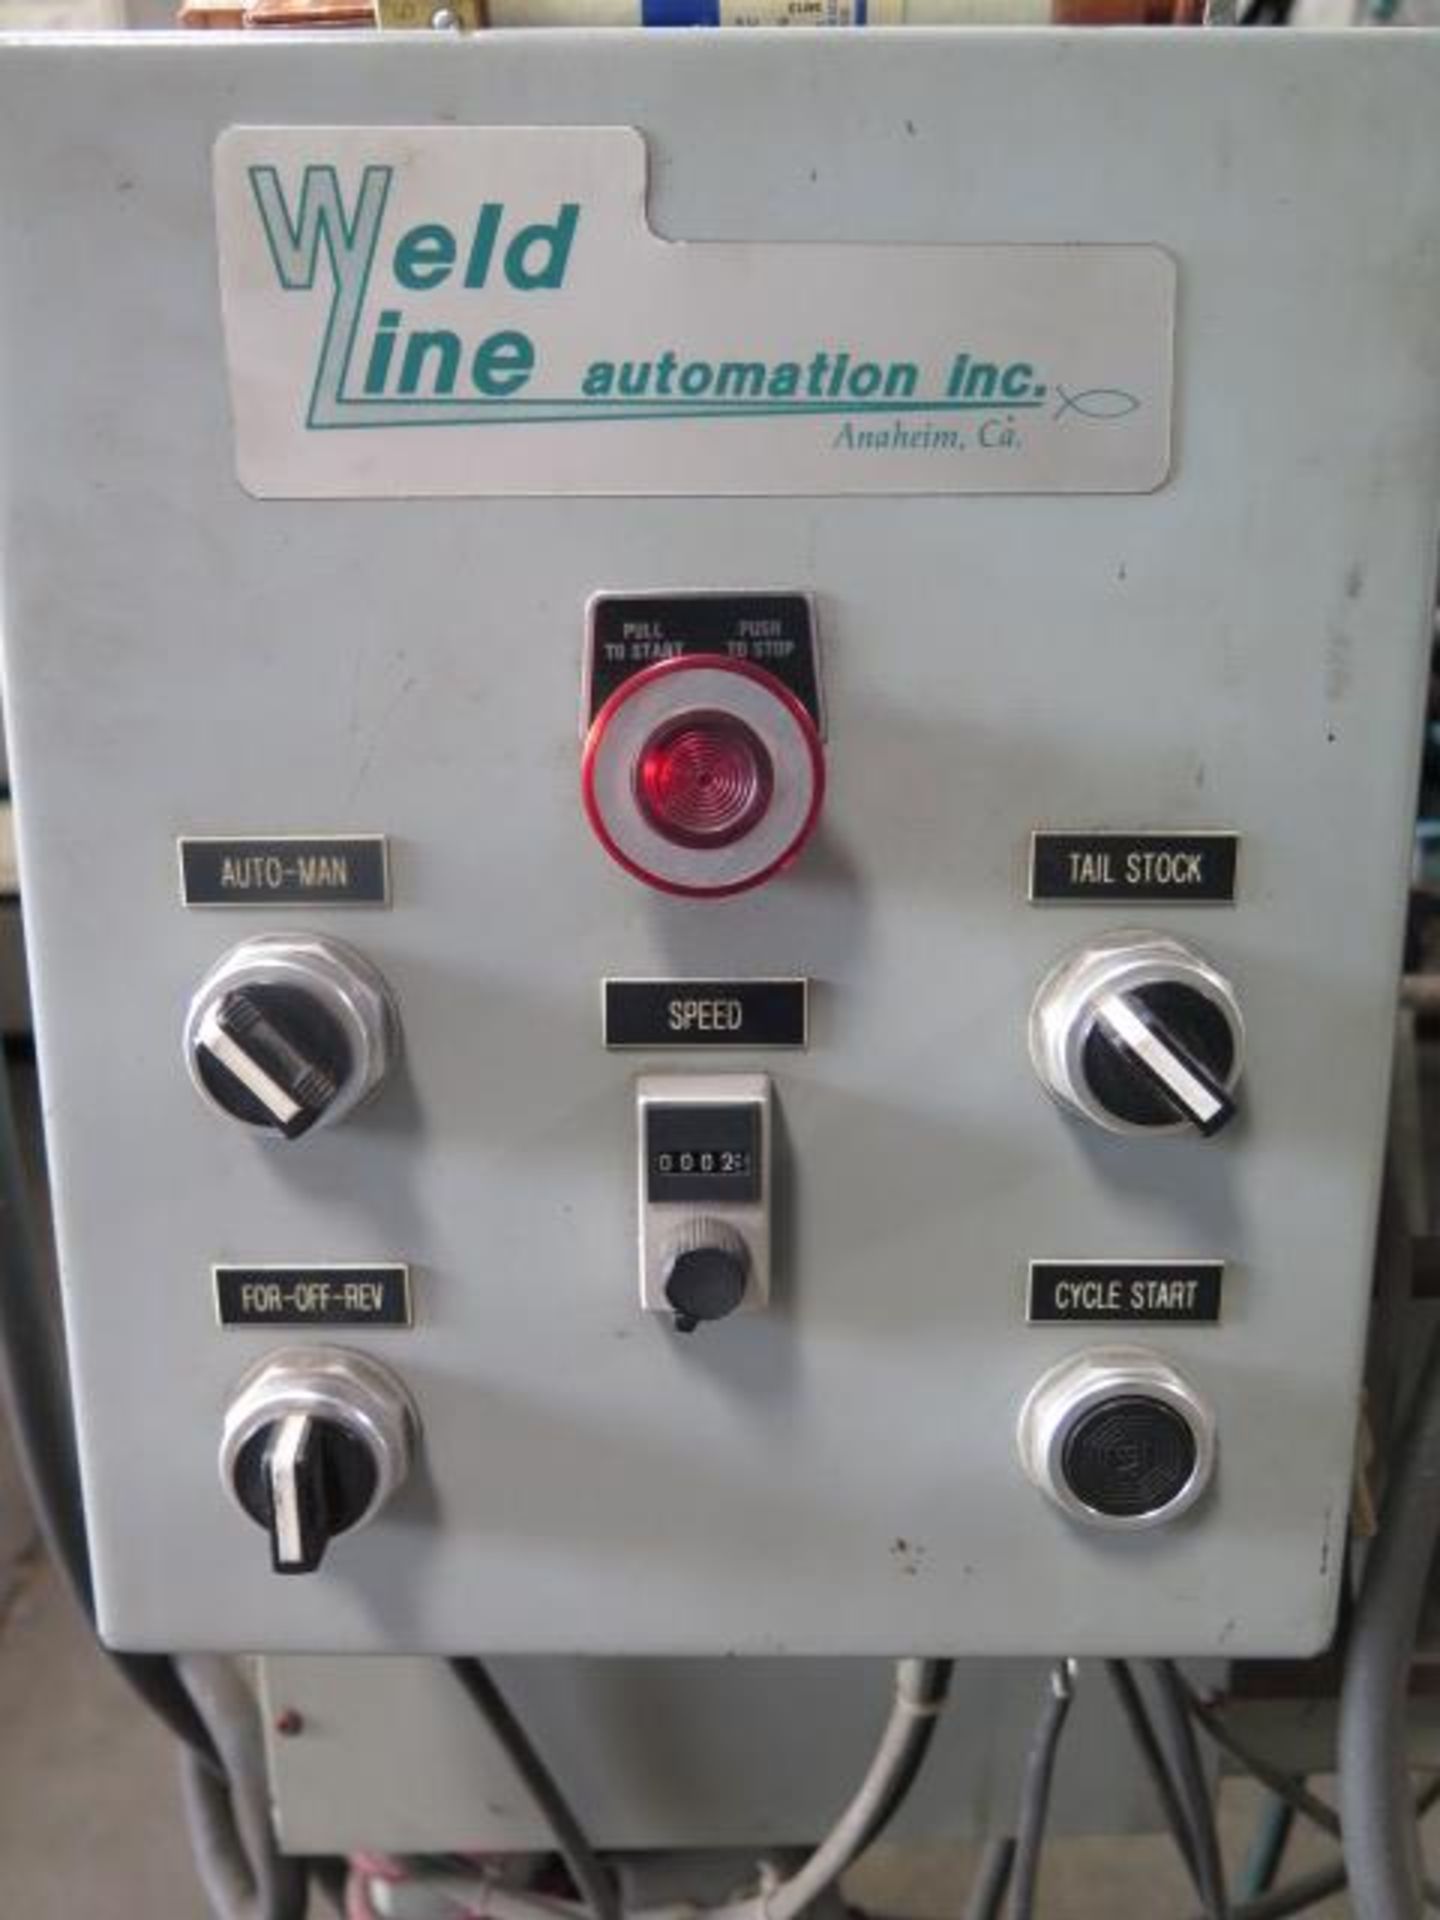 Weld Line Automation Syst Automated Seam Welder w/n MK2000A 300 Amp CV-CC Pulsed Welding, SOLD AS IS - Image 4 of 13